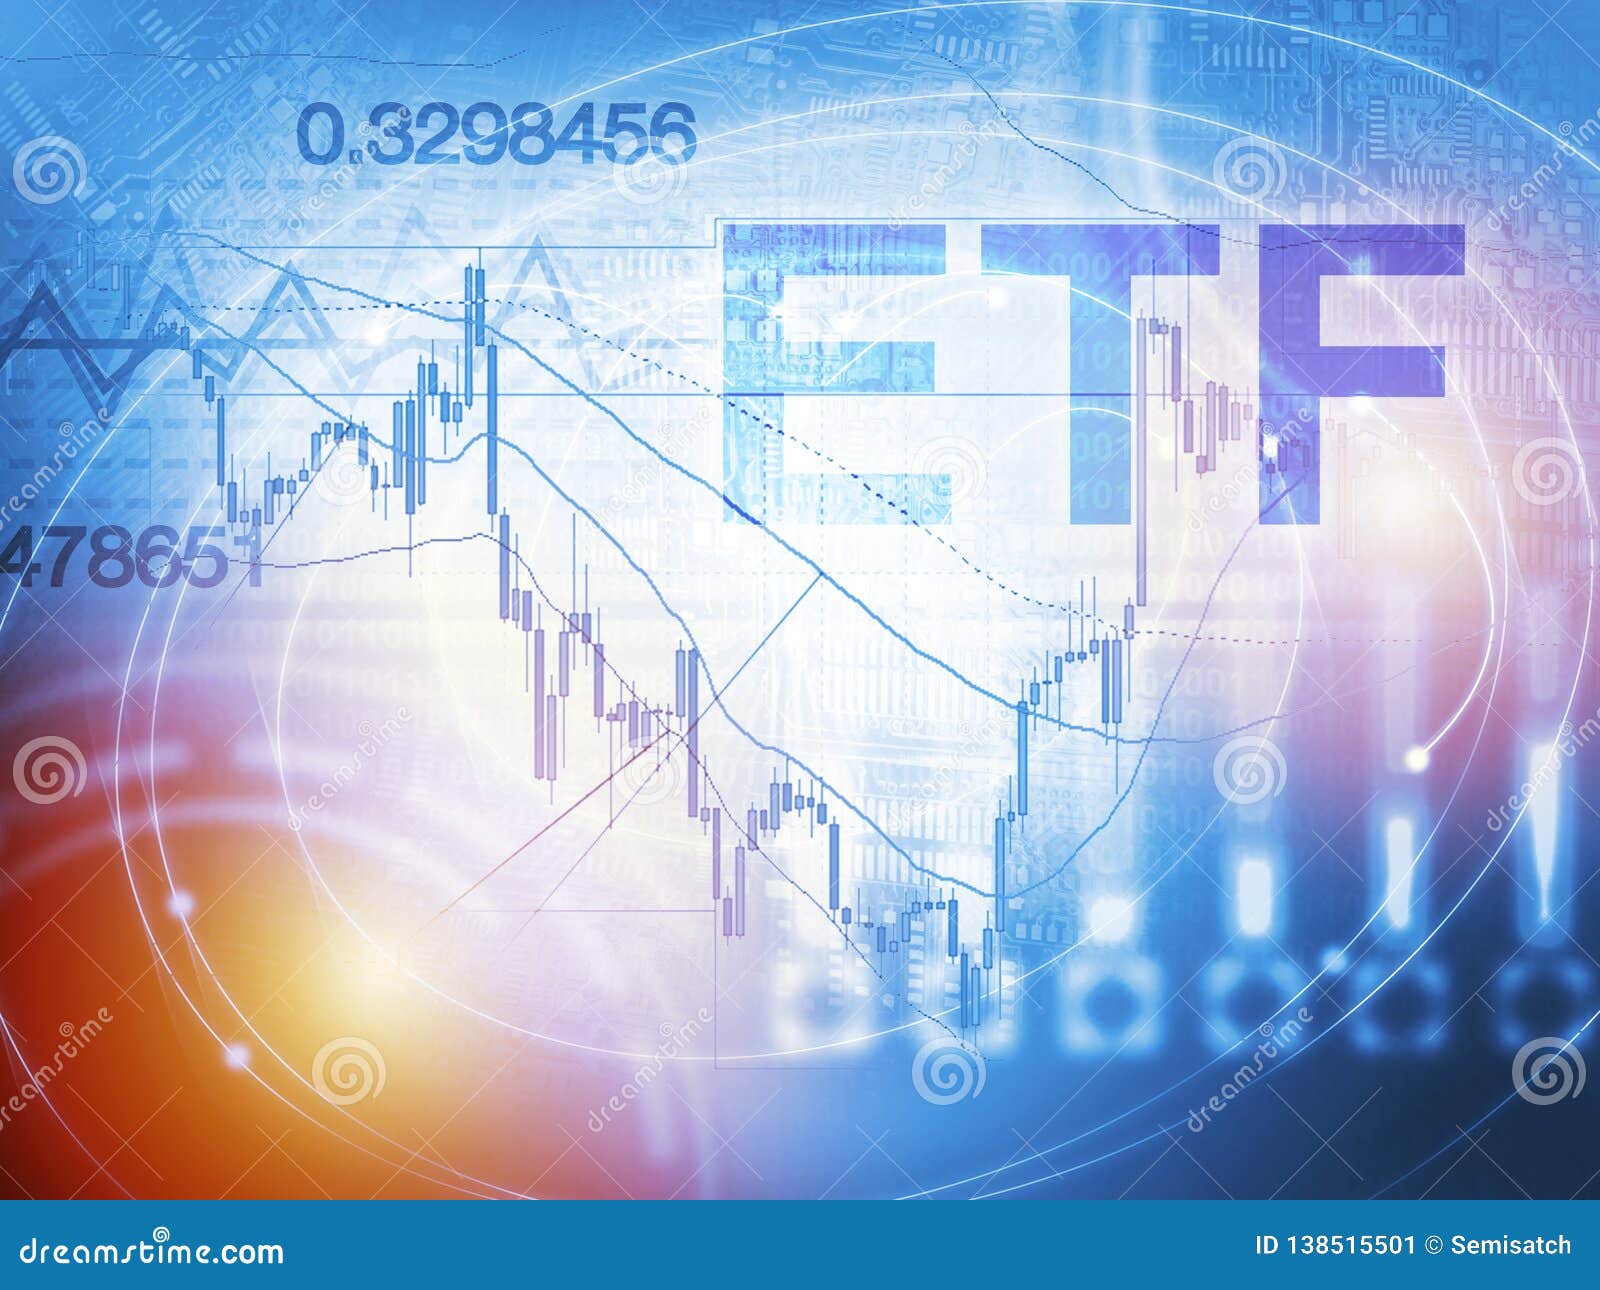 etf - exchange traded fund. trade market ico ipo financial technology